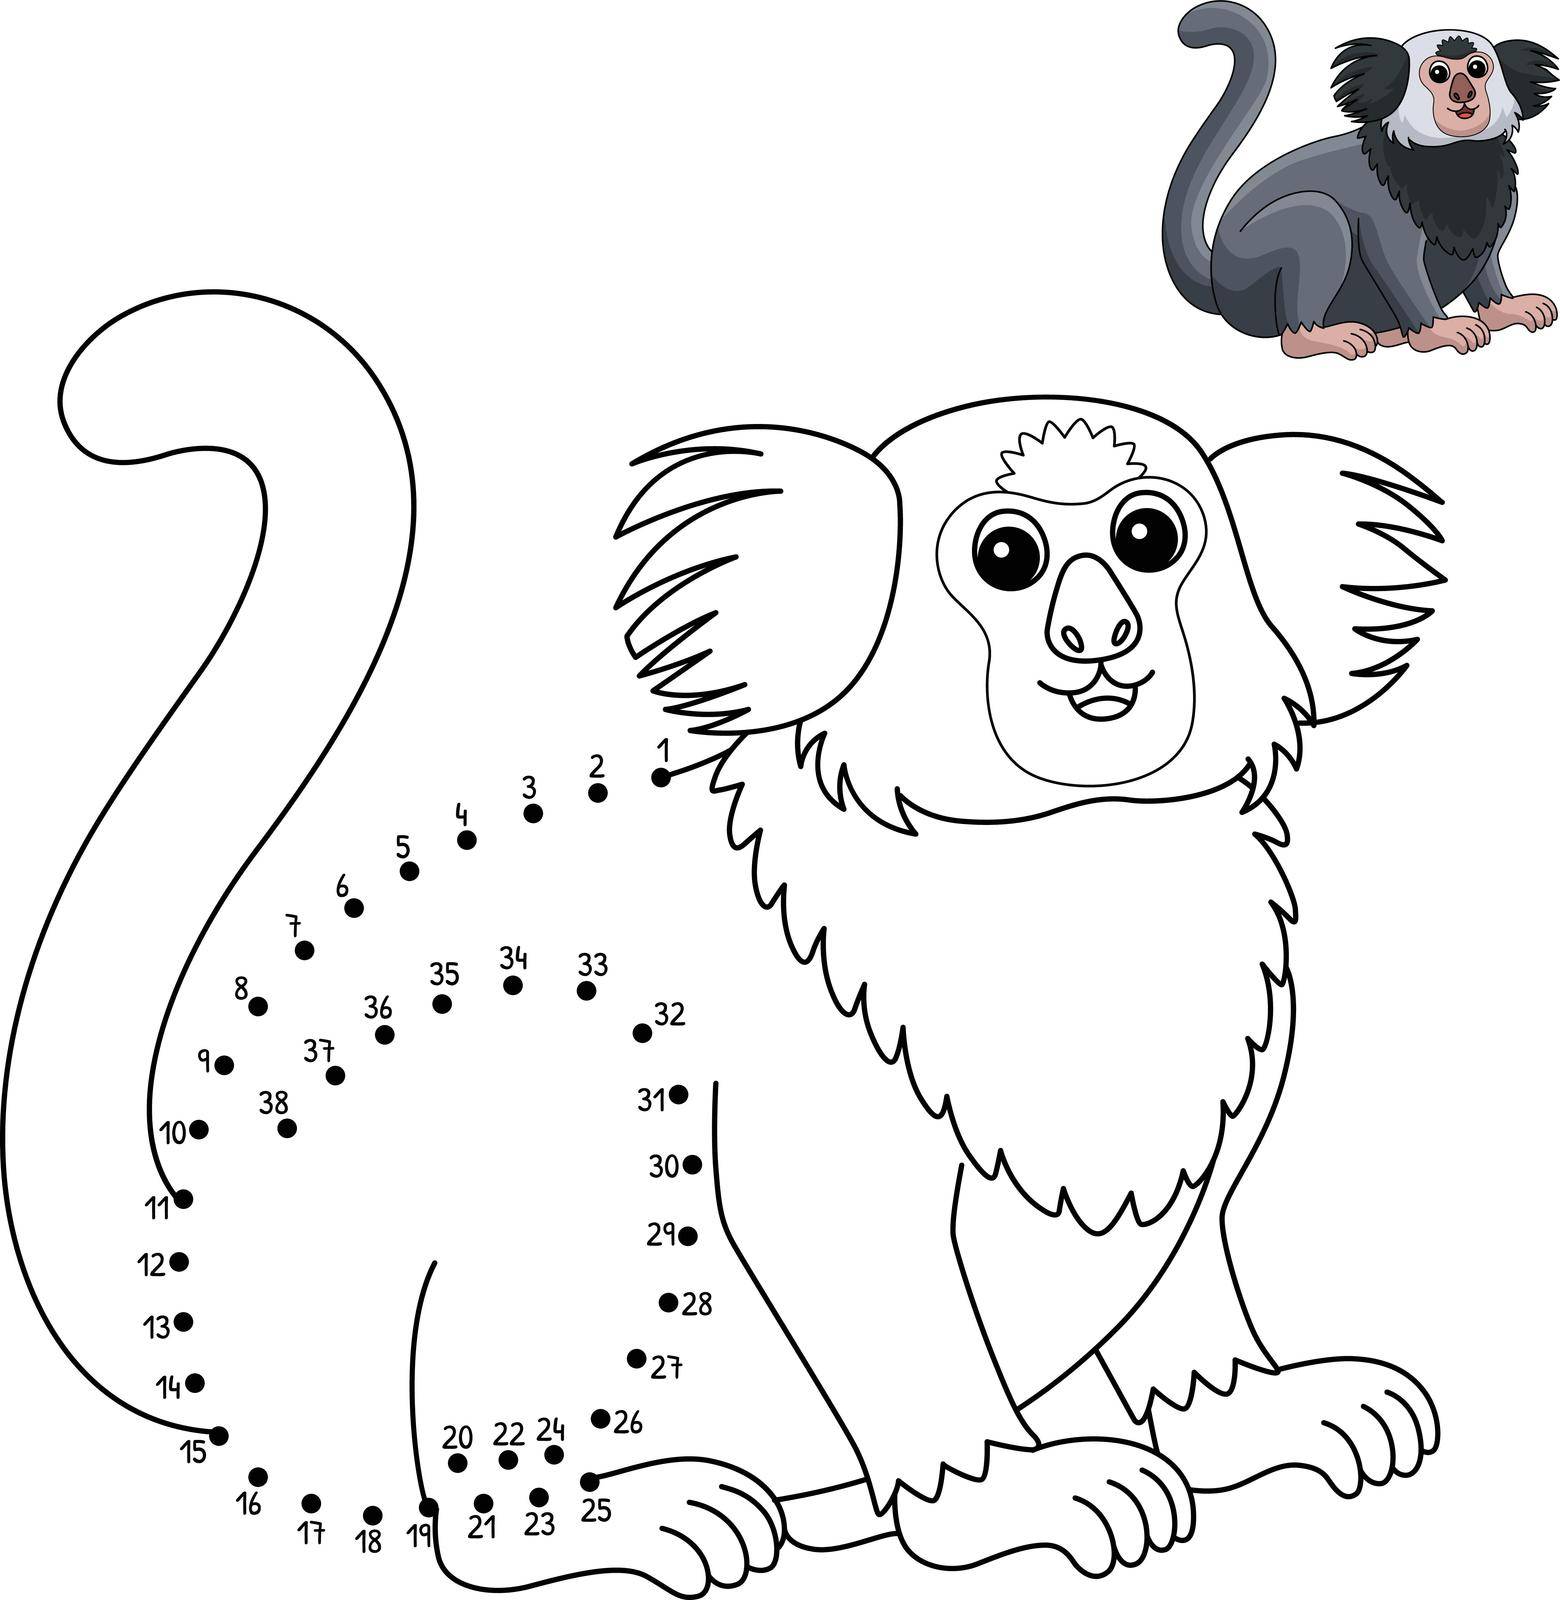 A cute and funny connect-the-dots coloring page of a Marmoset Animal. Provides hours of coloring fun for children. Color, this page is very easy. Suitable for little kids and toddlers.